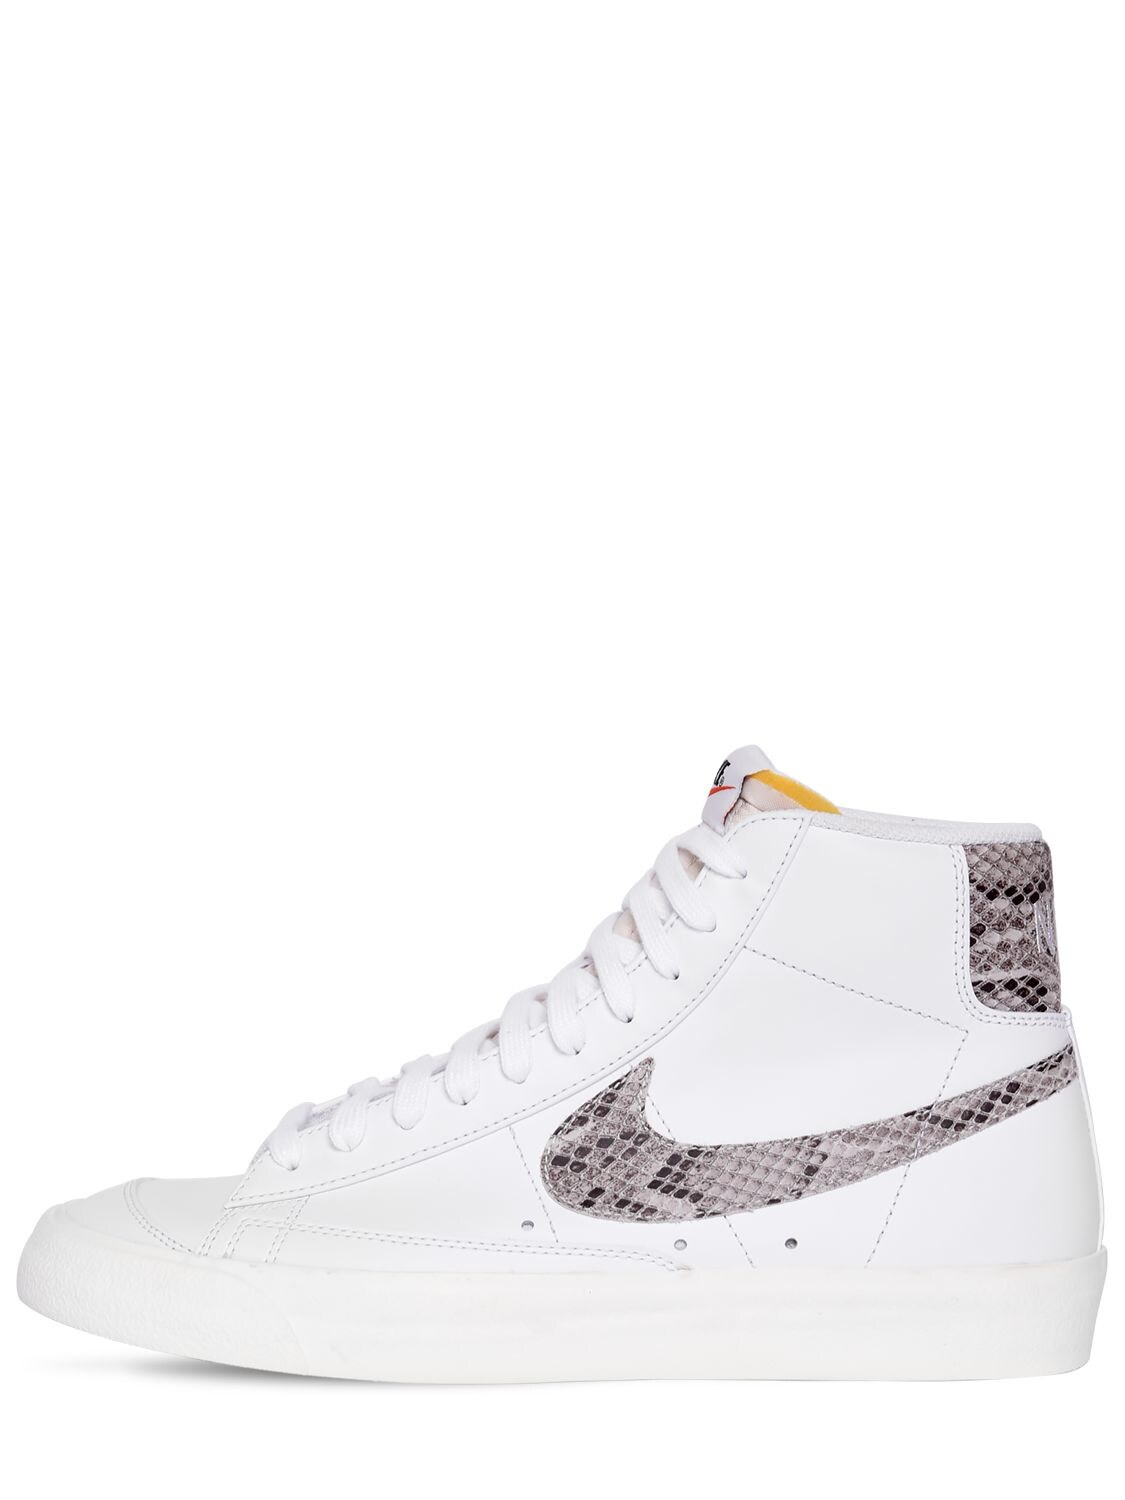 NIKE BLAZER MID '77 VNTG WE REPTILE trainers,70I0M1011-MTAX0